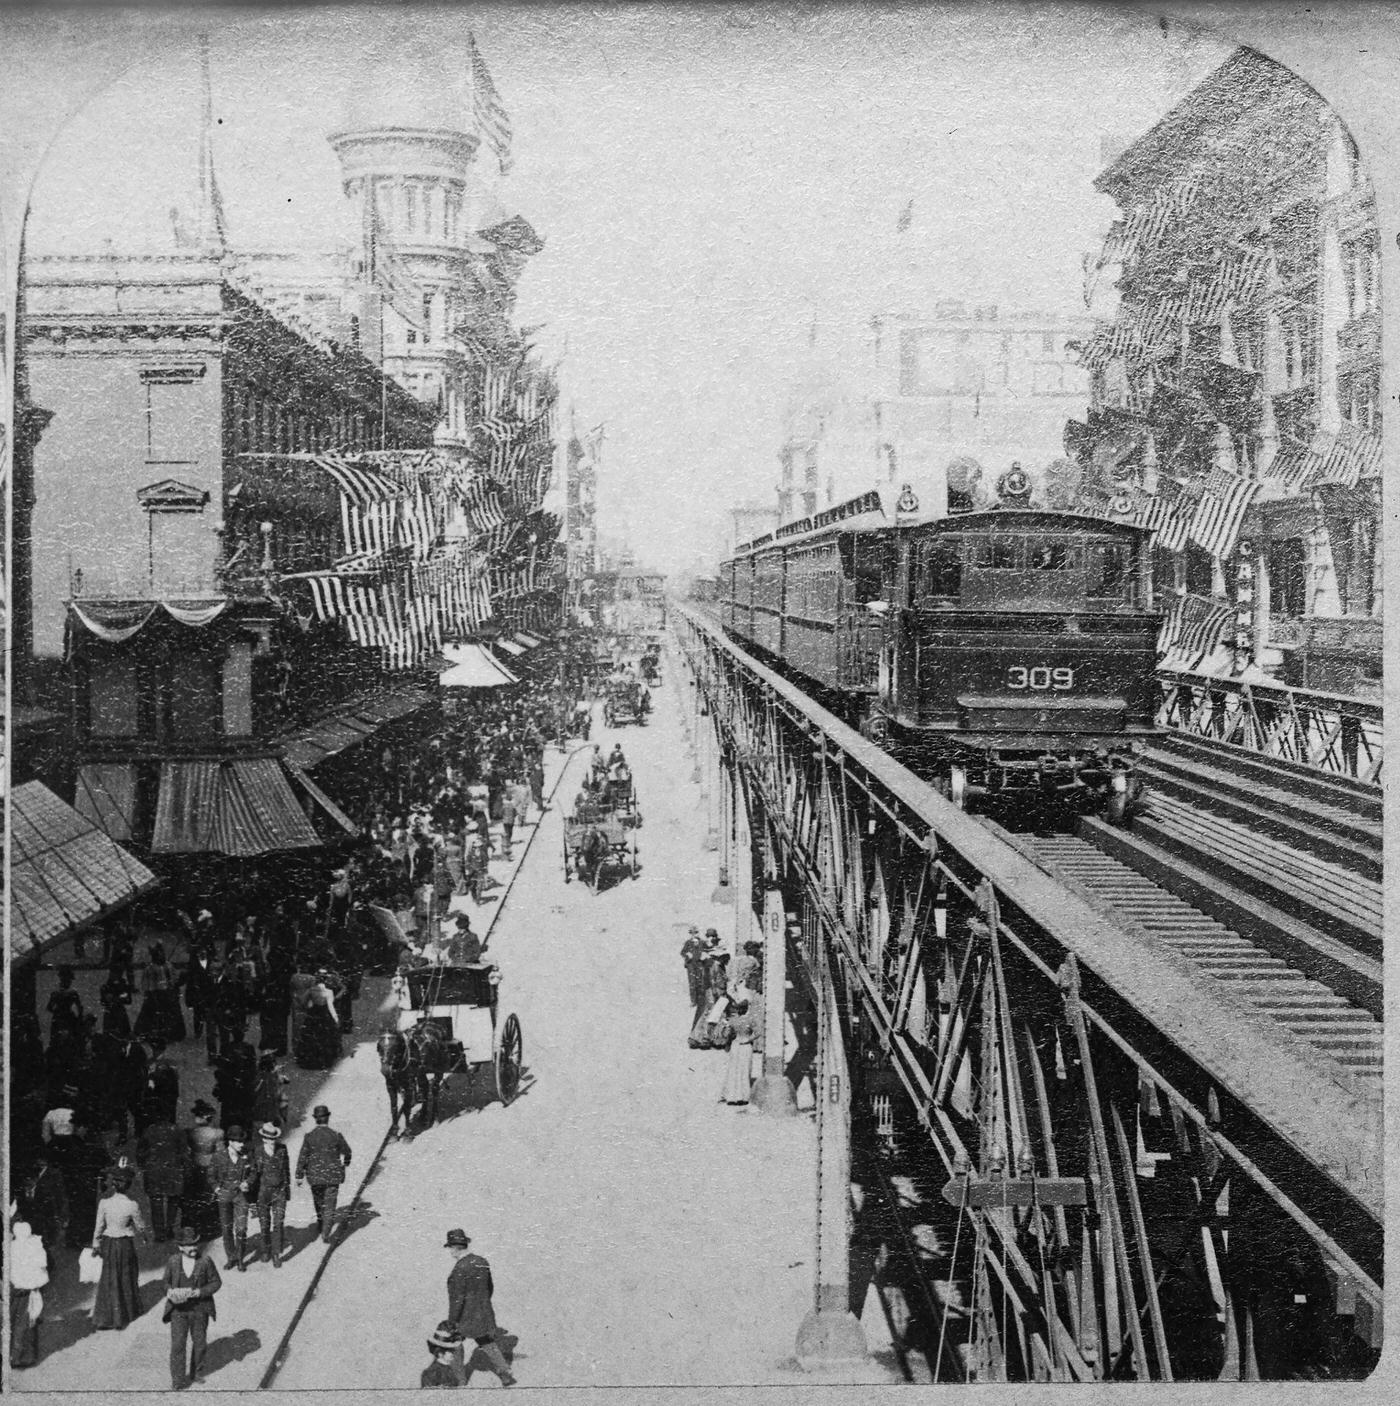 Sixth Avenue: Shopping District And Elevated Railway On Sixth Avenue, From 18Th Avenue, 1899.